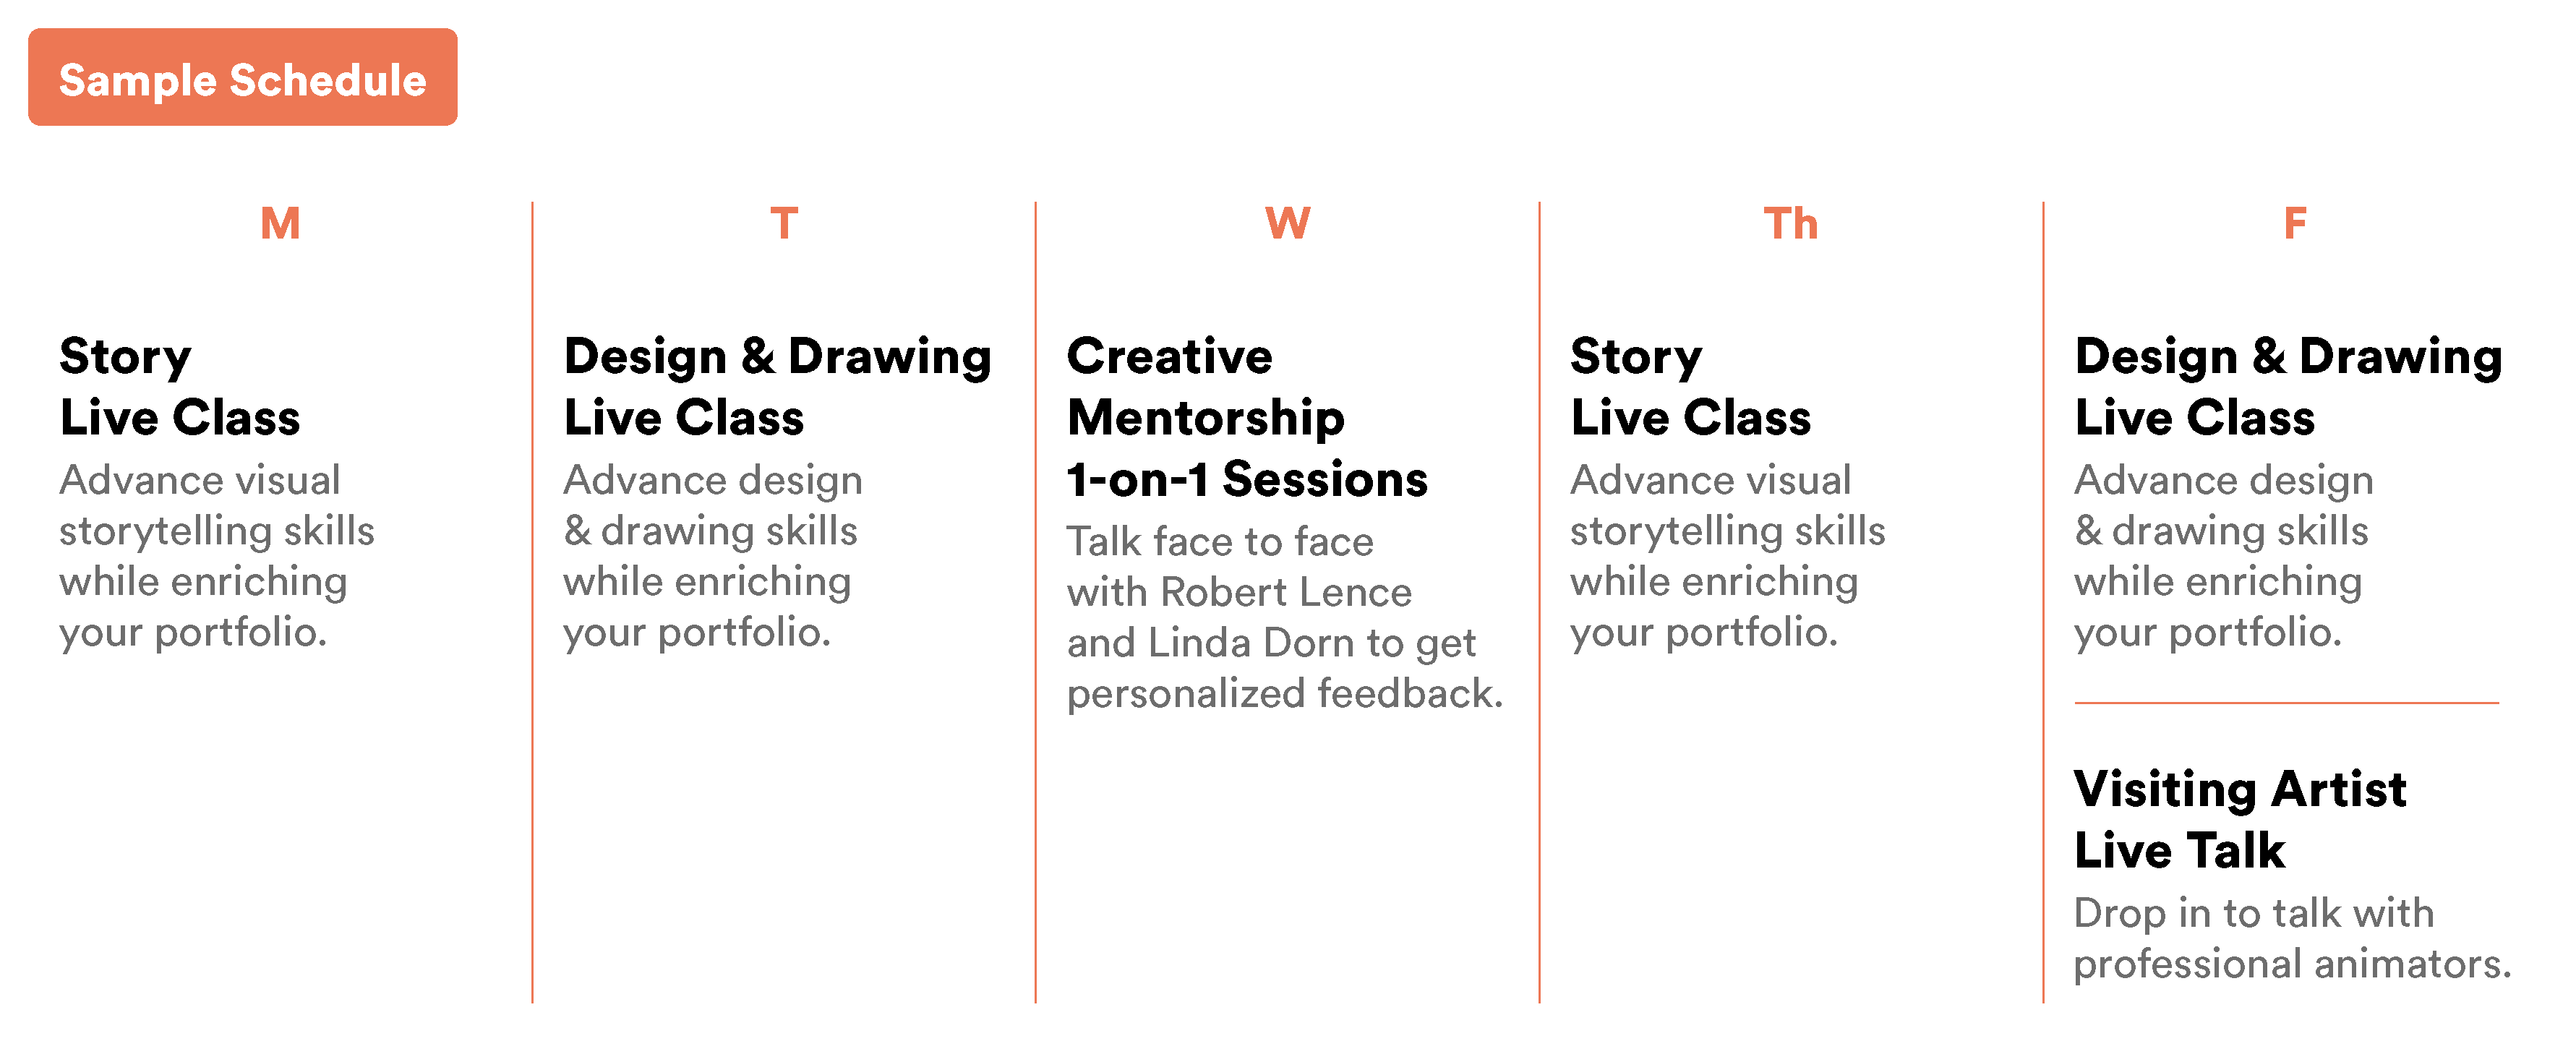 A sample schedule for High-Touch animation that reads: Monday: Story Live Class Advance visual storytelling skills while enriching your portfolio.  Tuesday:  Design & Drawing Live Class Advance design and drawing skills while enriching your portfolio.  Wednesday:  Creative Mentorship Live 1-on-1 Sessions Talk face to face with Robert Lence and Linda Dorn to get personalized feedback.    Thursday:  Story Live Class Advance visual storytelling skills while enriching your portfolio.  Friday:  Design & Drawing Live Class Advance design and drawing skills while enriching your portfolio.